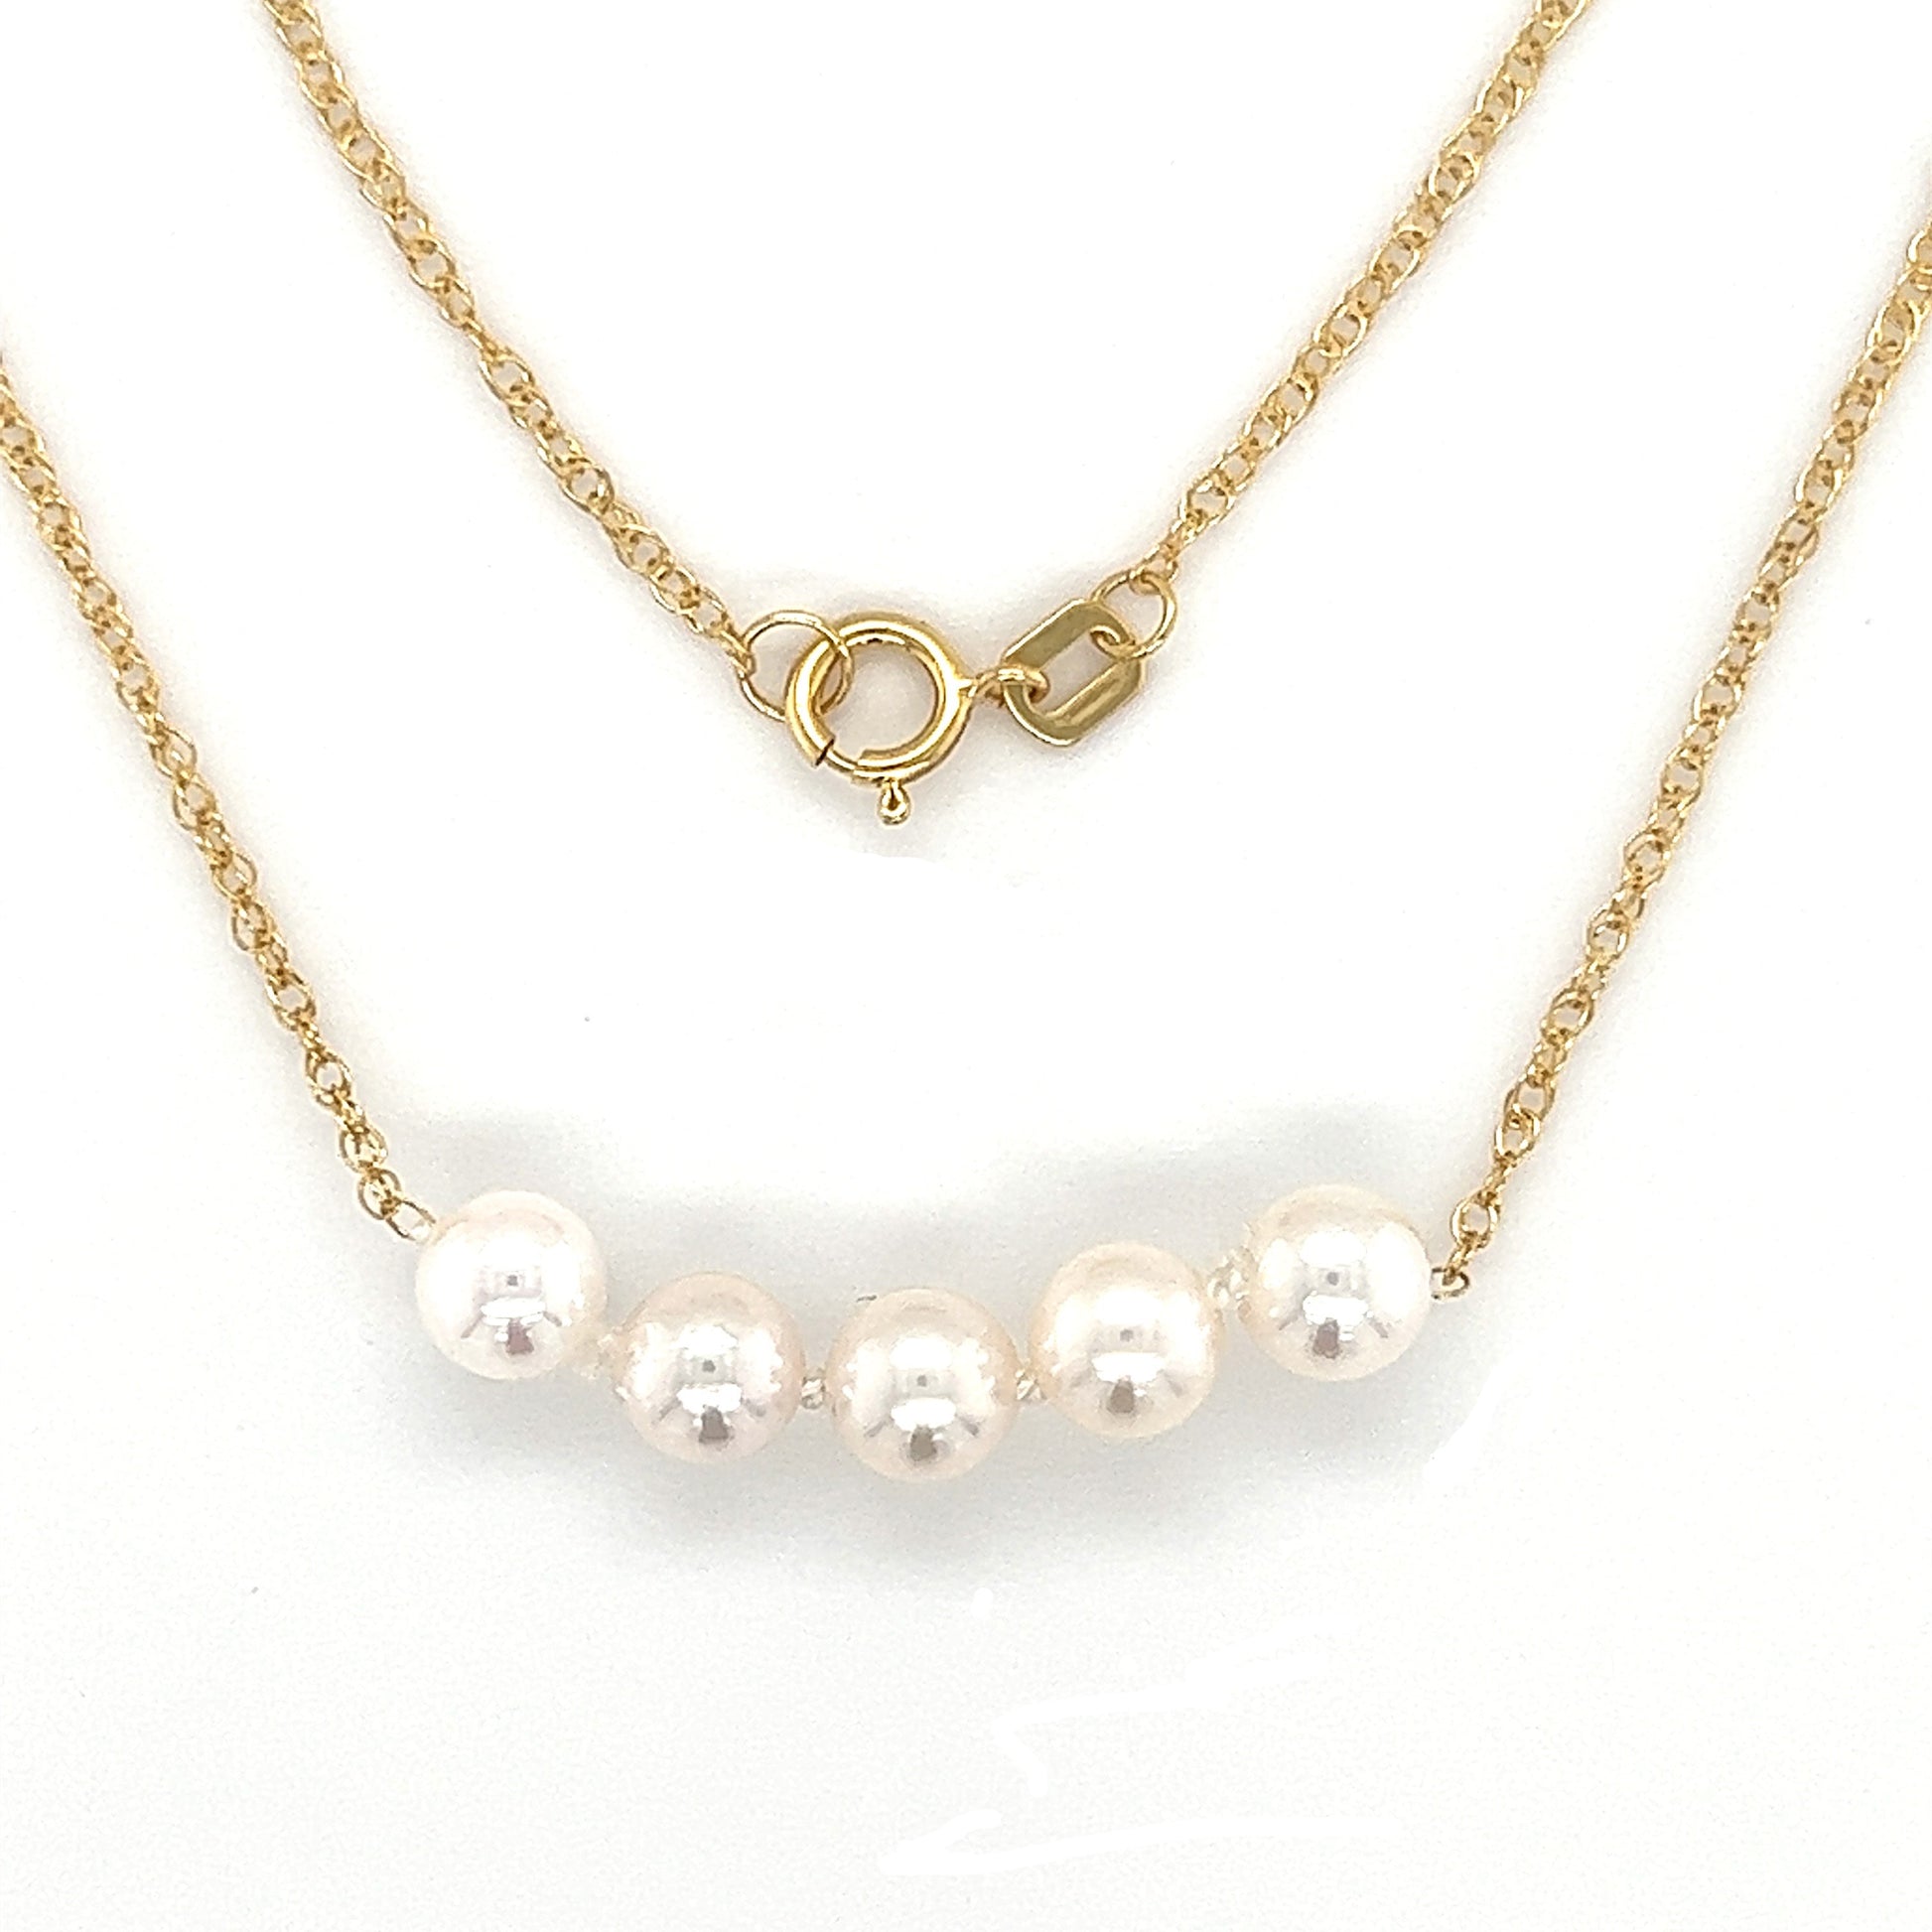 Add-a-Pearl Necklace with Five 5mm White Pearls in 10K Yellow Gold. Pearls and Clasp View